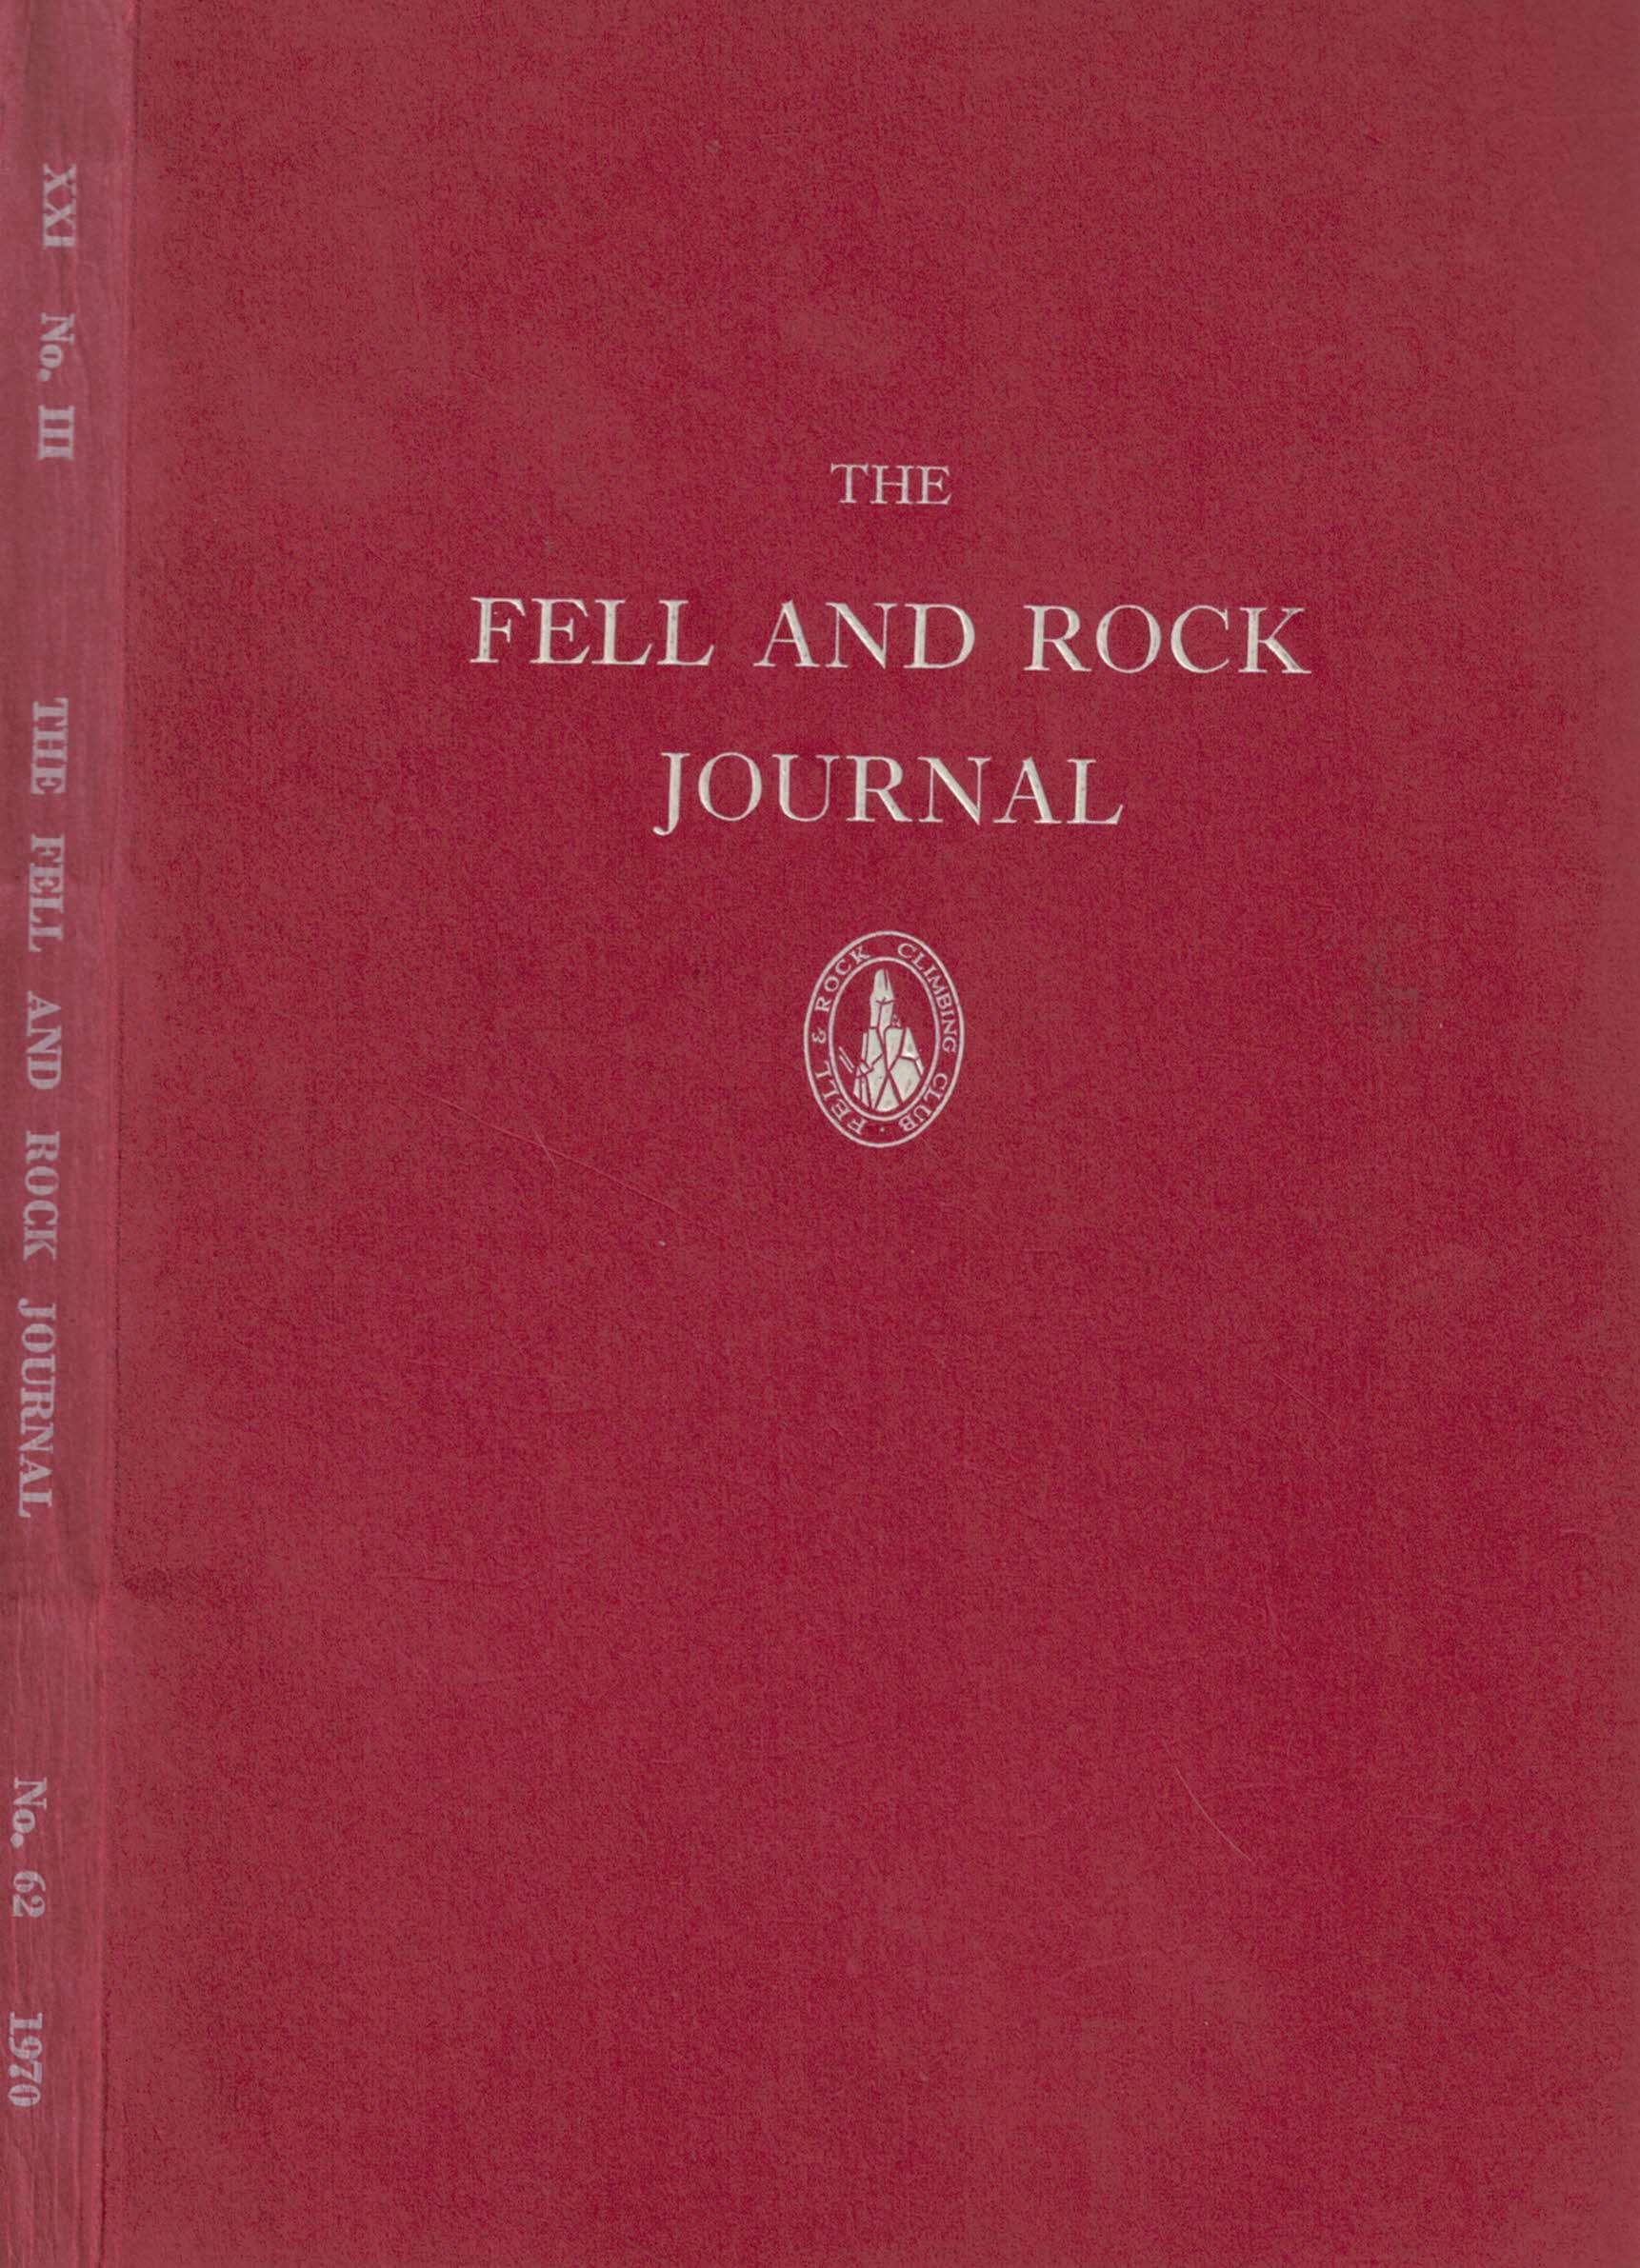 The Journal of the Fell & Rock Climbing Club of the English Lake District. No 62. (Volume 21 No 3) 1970.